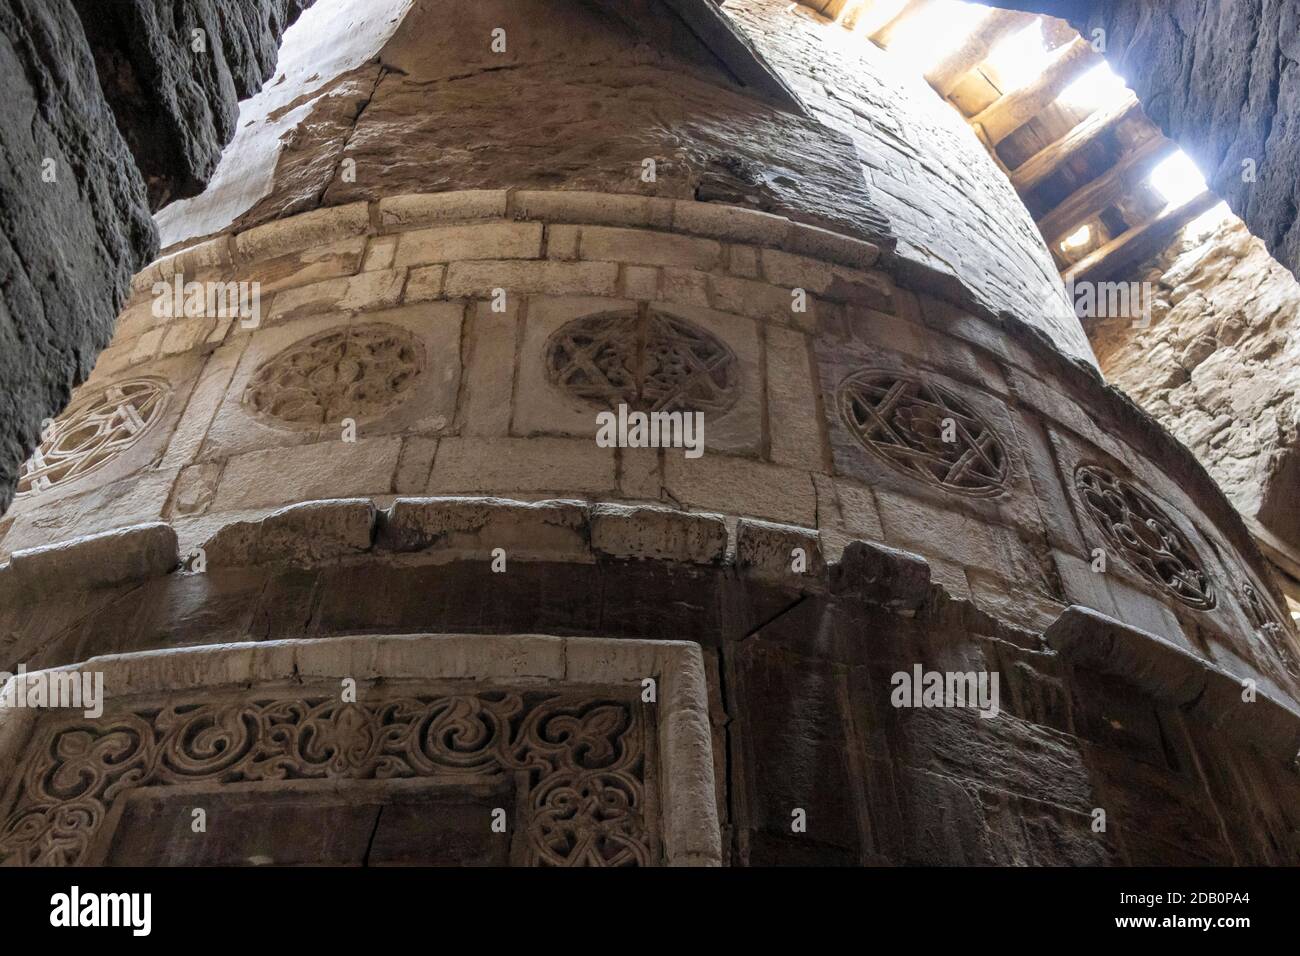 detail of decoration, north minaret of the Mosque of al-Hakim, Cairo, Egypt Stock Photo